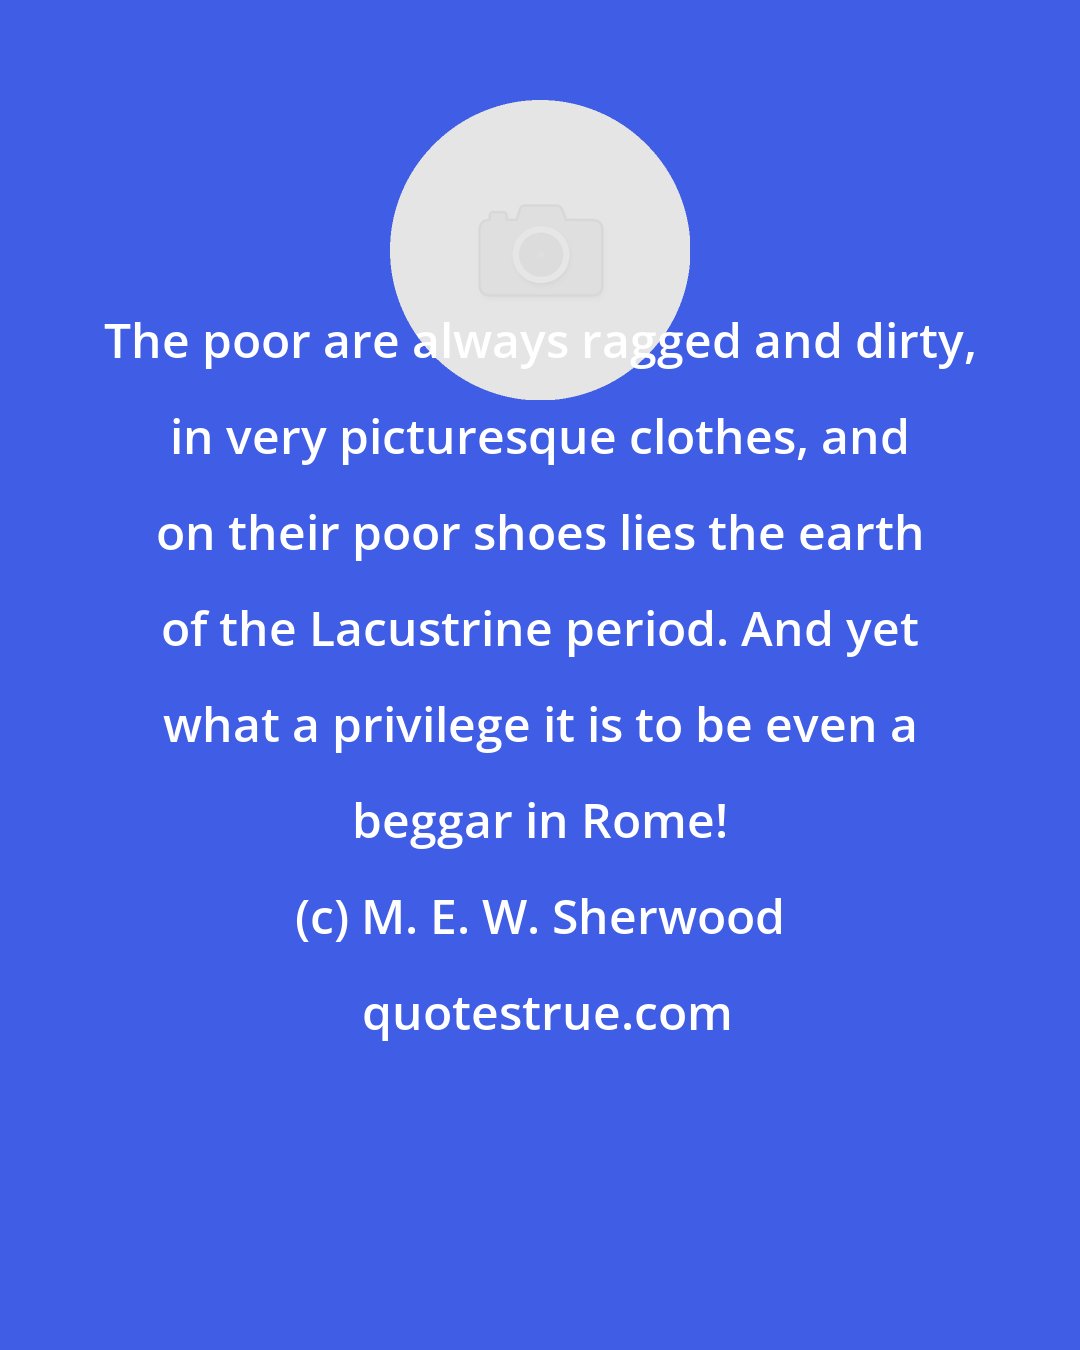 M. E. W. Sherwood: The poor are always ragged and dirty, in very picturesque clothes, and on their poor shoes lies the earth of the Lacustrine period. And yet what a privilege it is to be even a beggar in Rome!